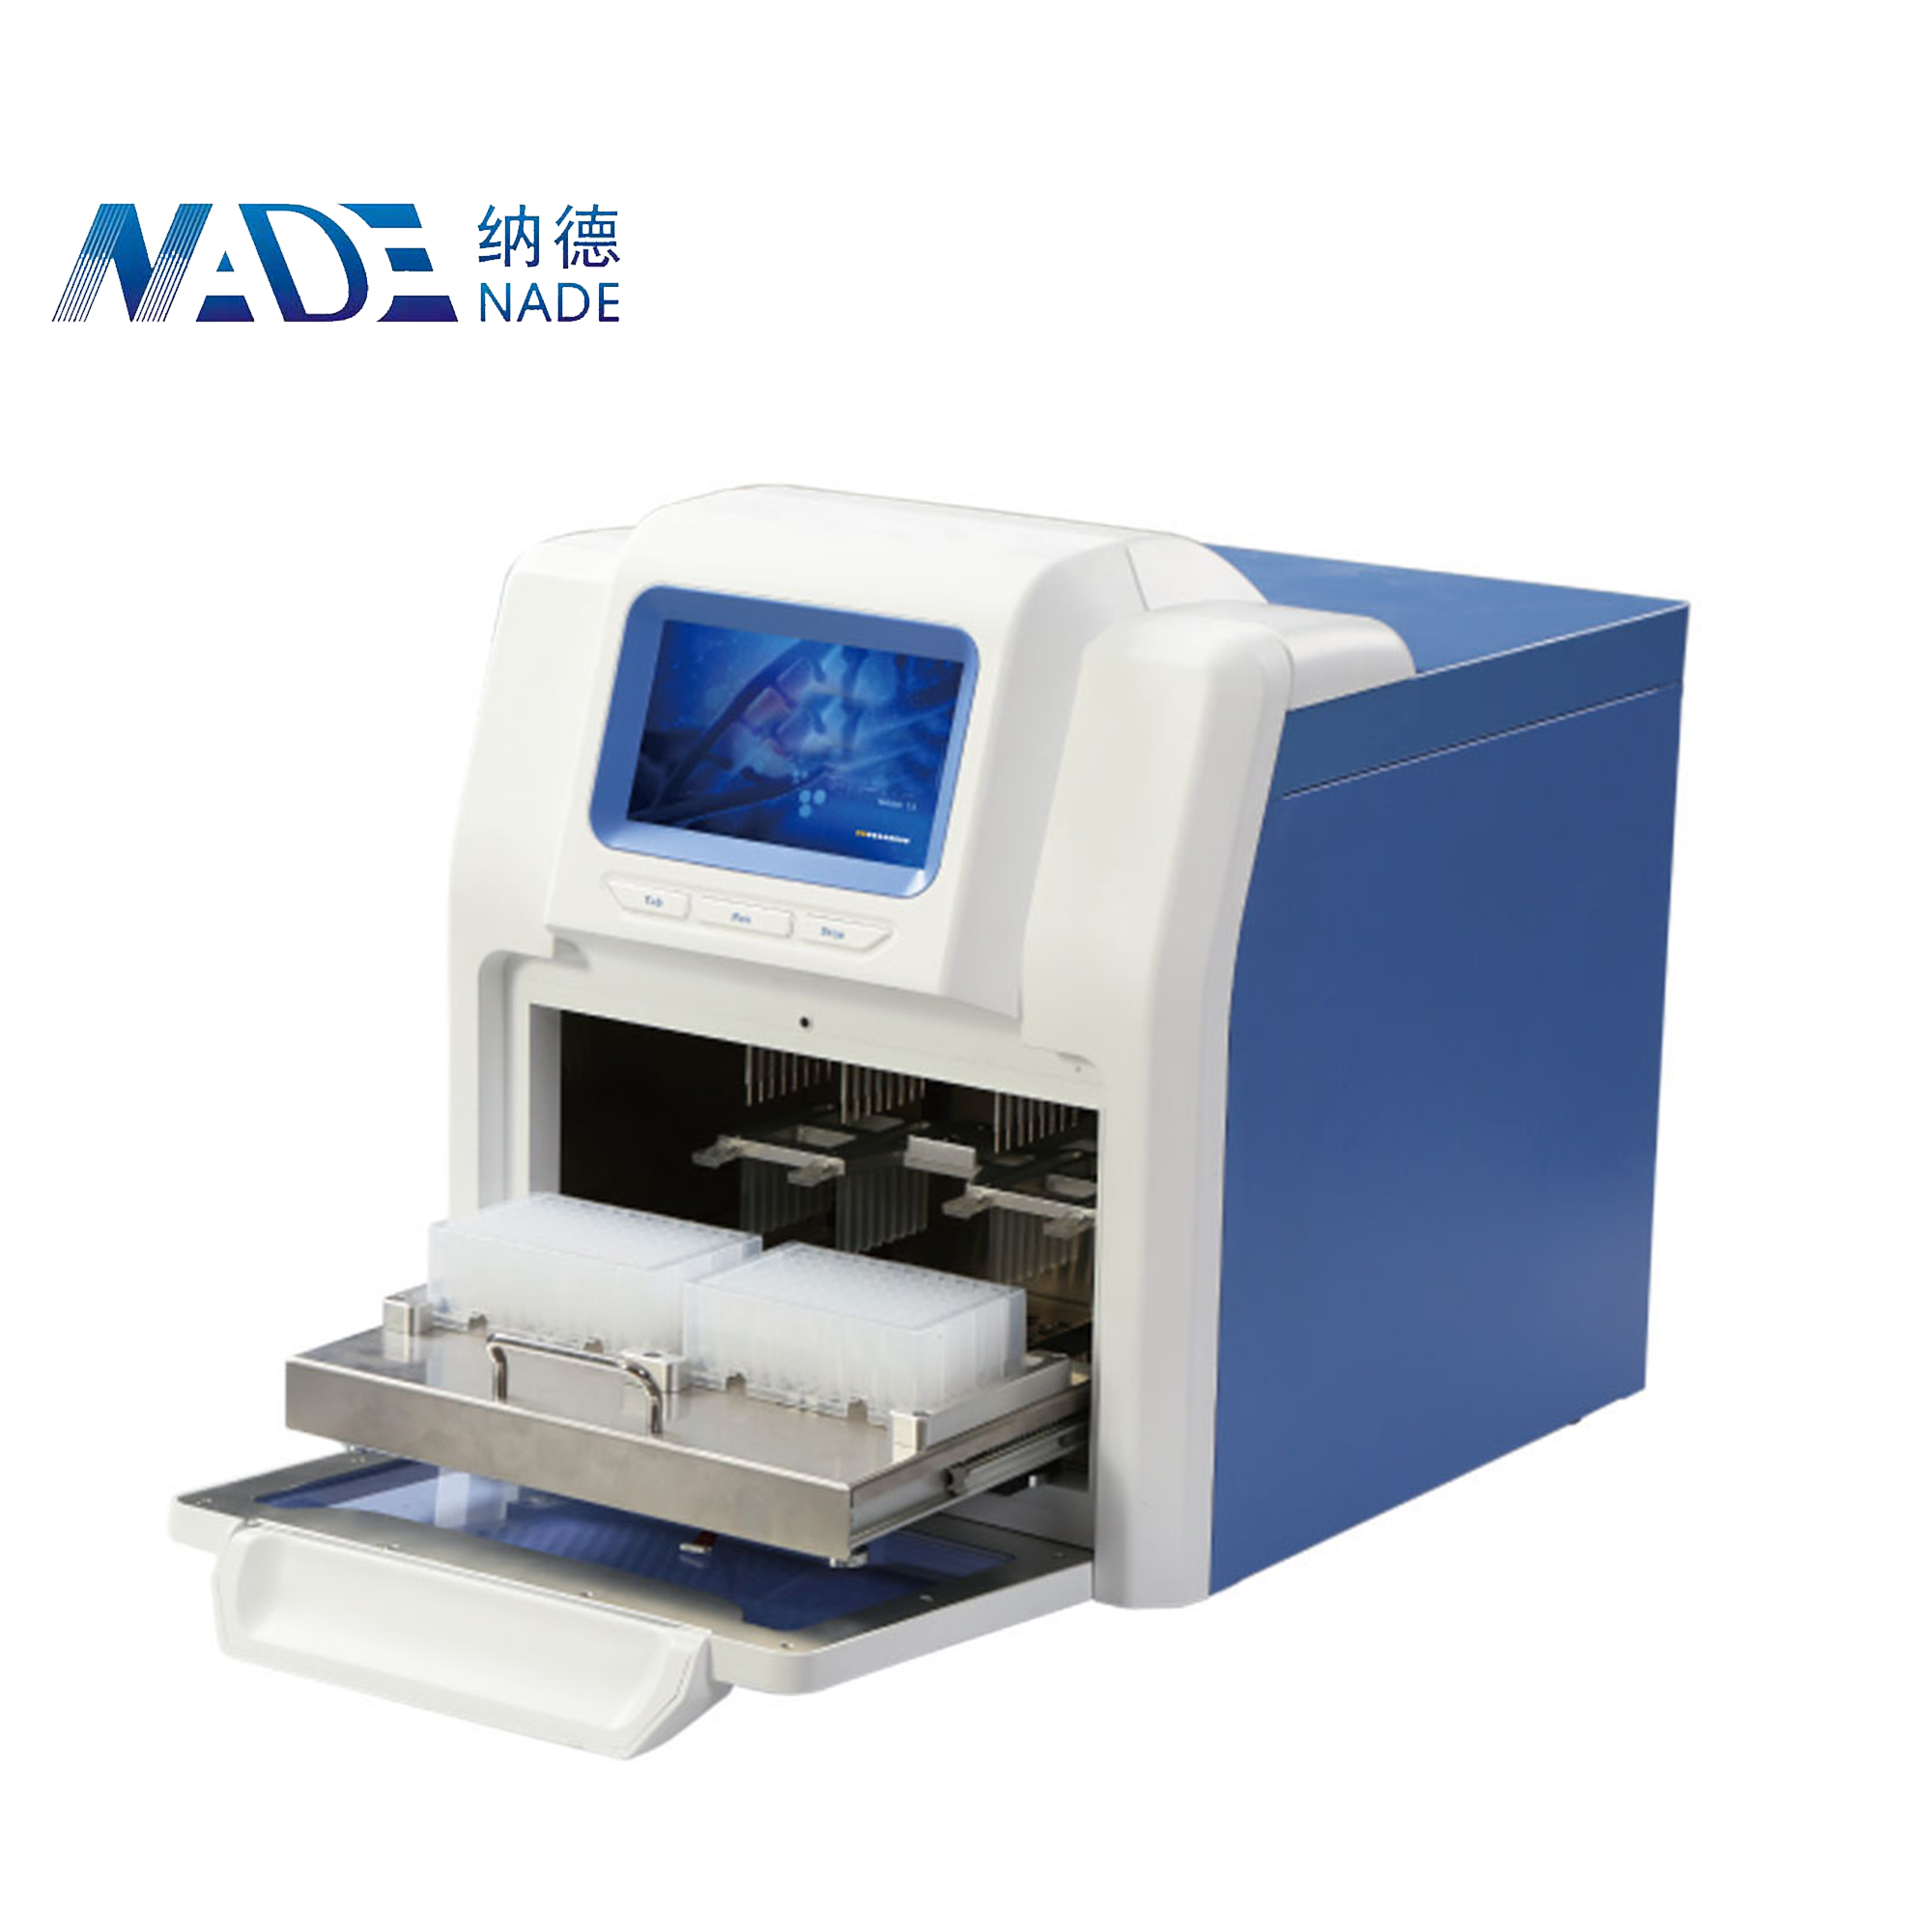 Nade Nucleic Acid Extractor/Nucleic Acid Purification System Auto-Pure32A